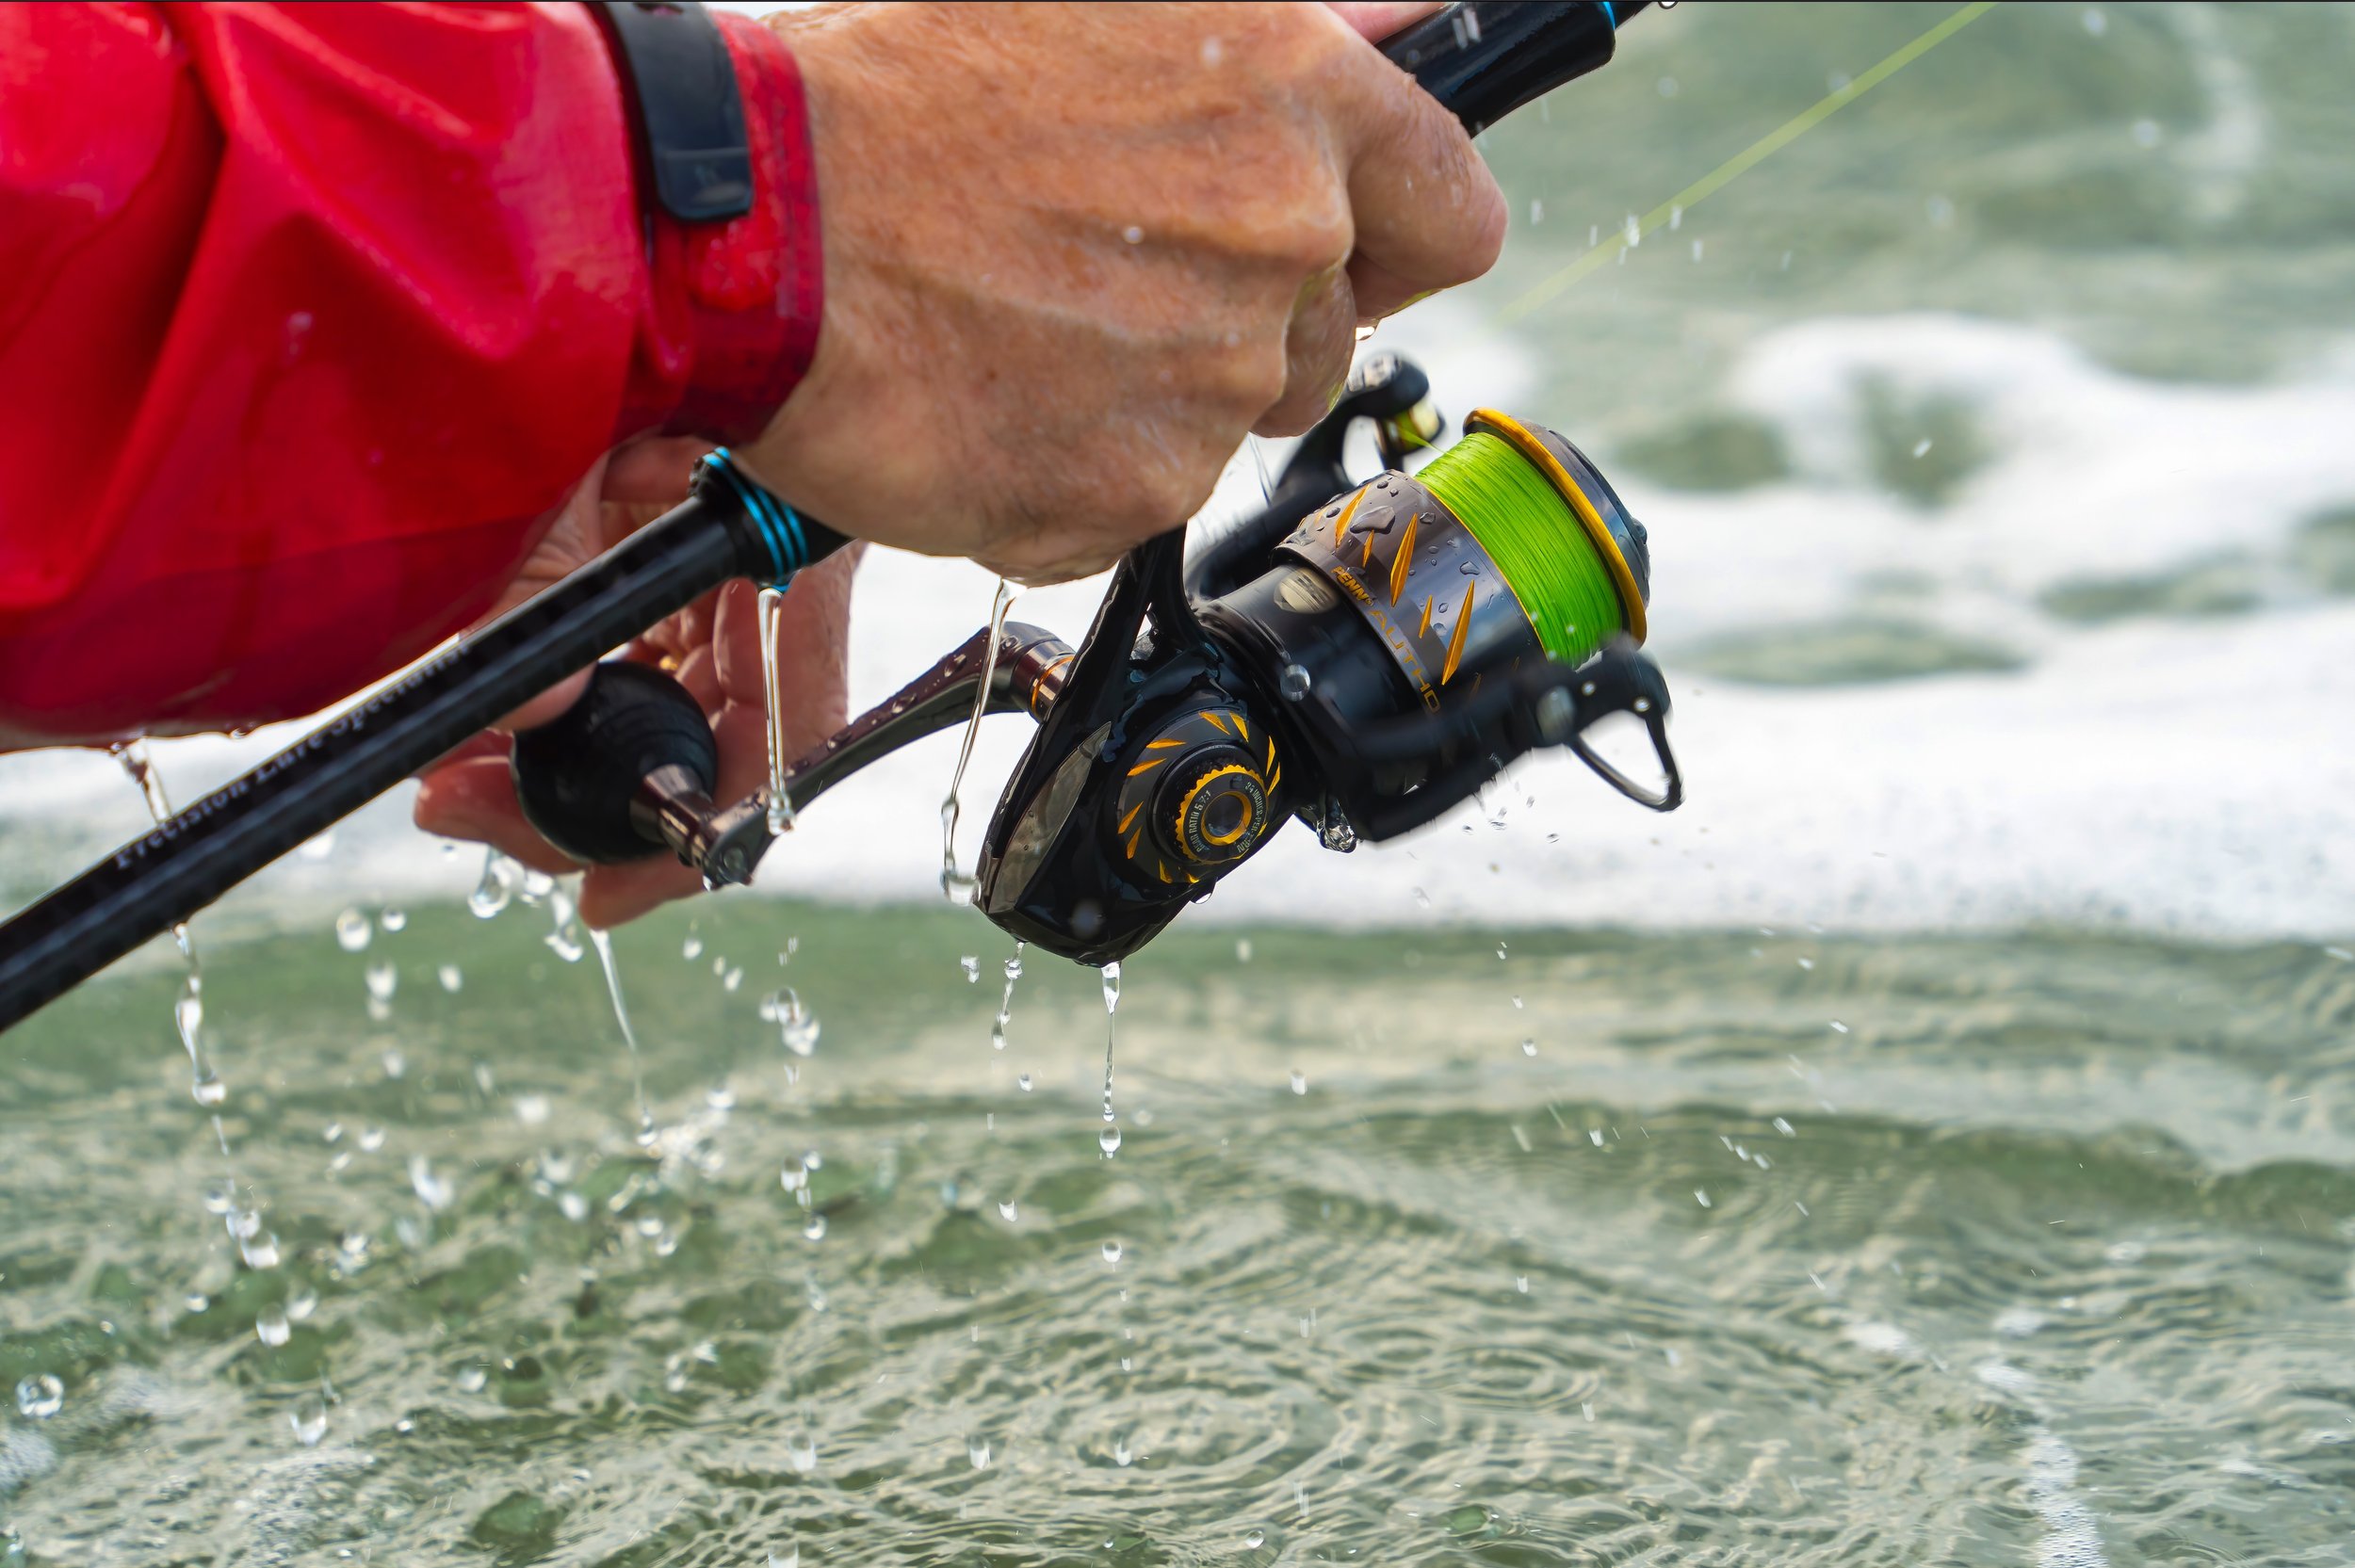 Is a double handled fishing reel better than a one-handled fishing